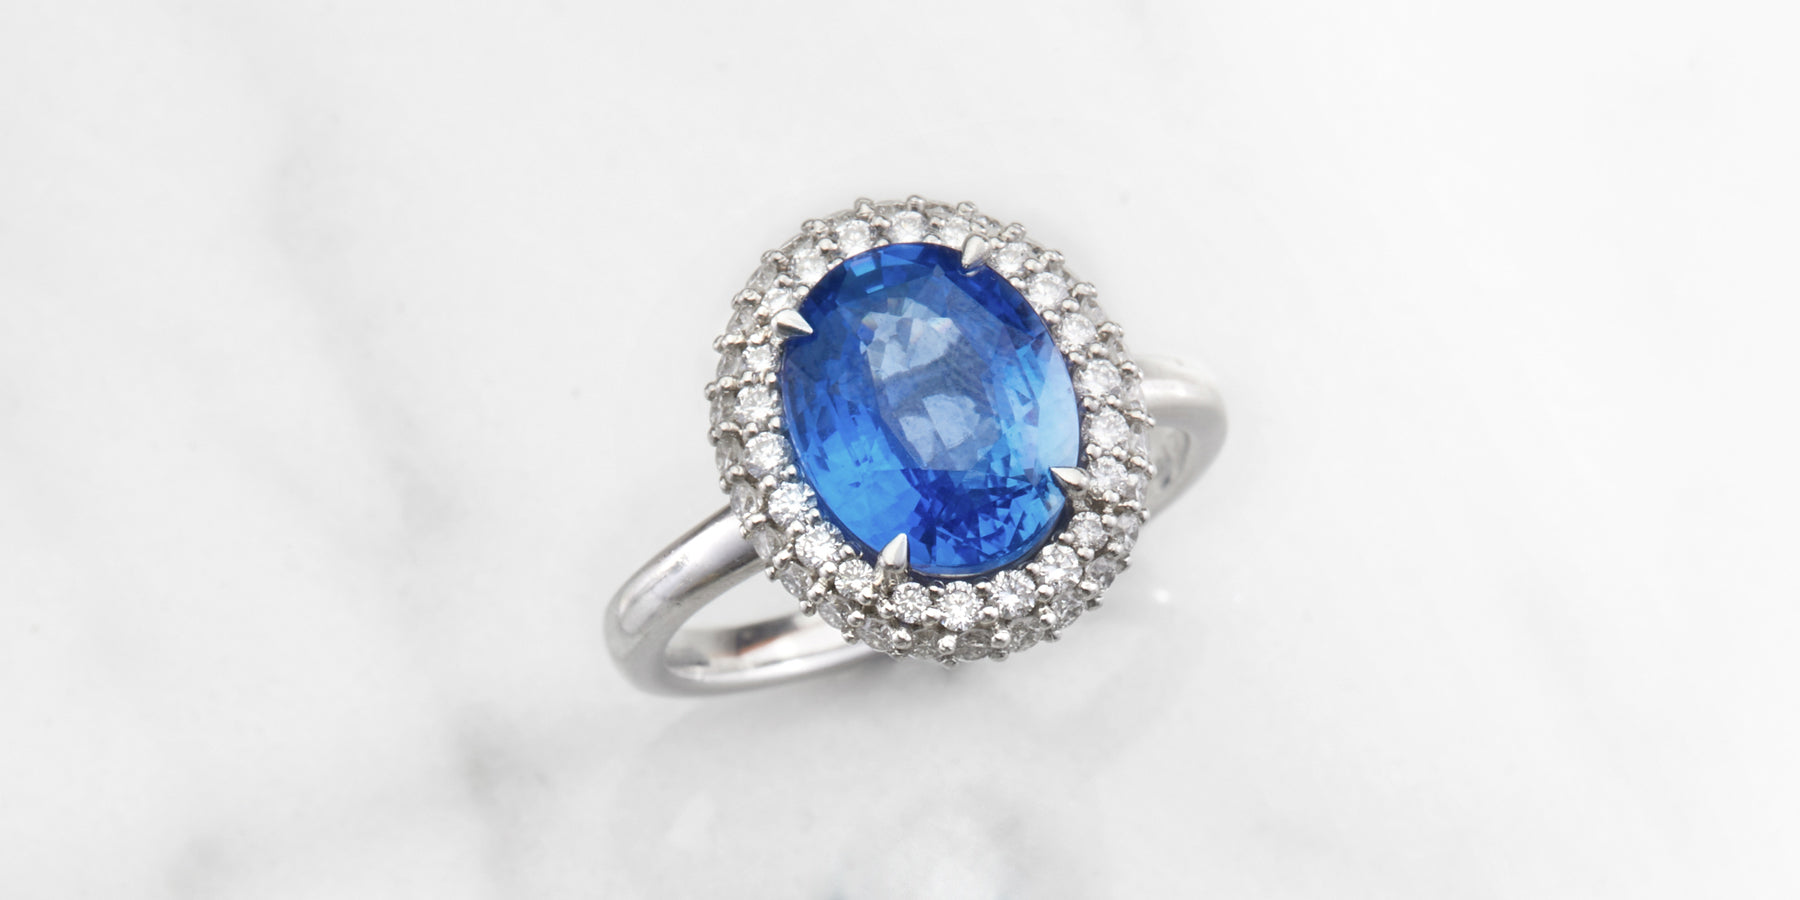 Blue Sapphire Vintage Ring from Fenton